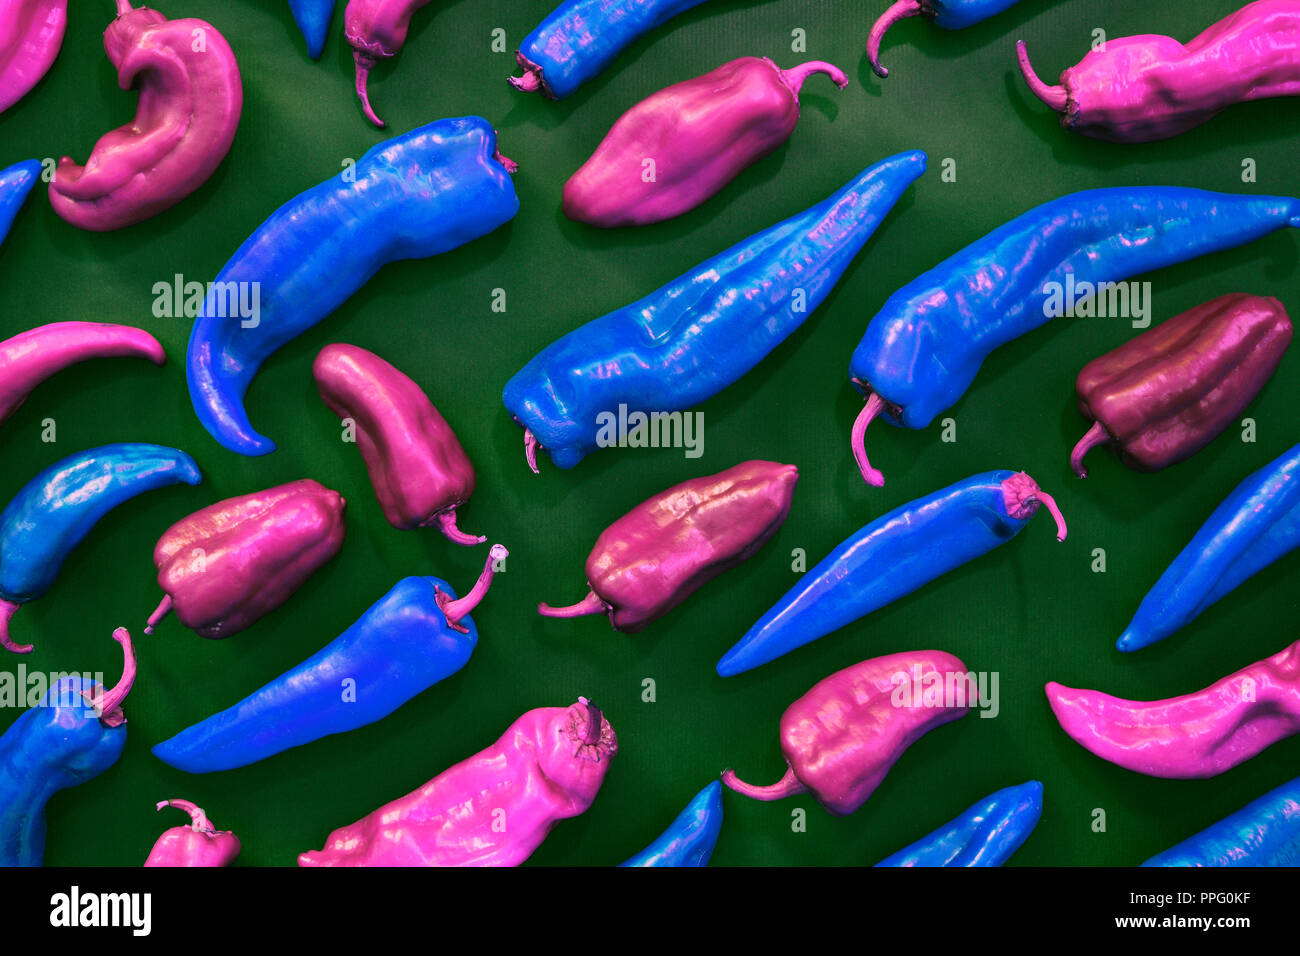 blue and pink peppers shapes creative pattern on a green background. Vegetables and food figures abstract colorful background. Top view. Pop art style Stock Photo